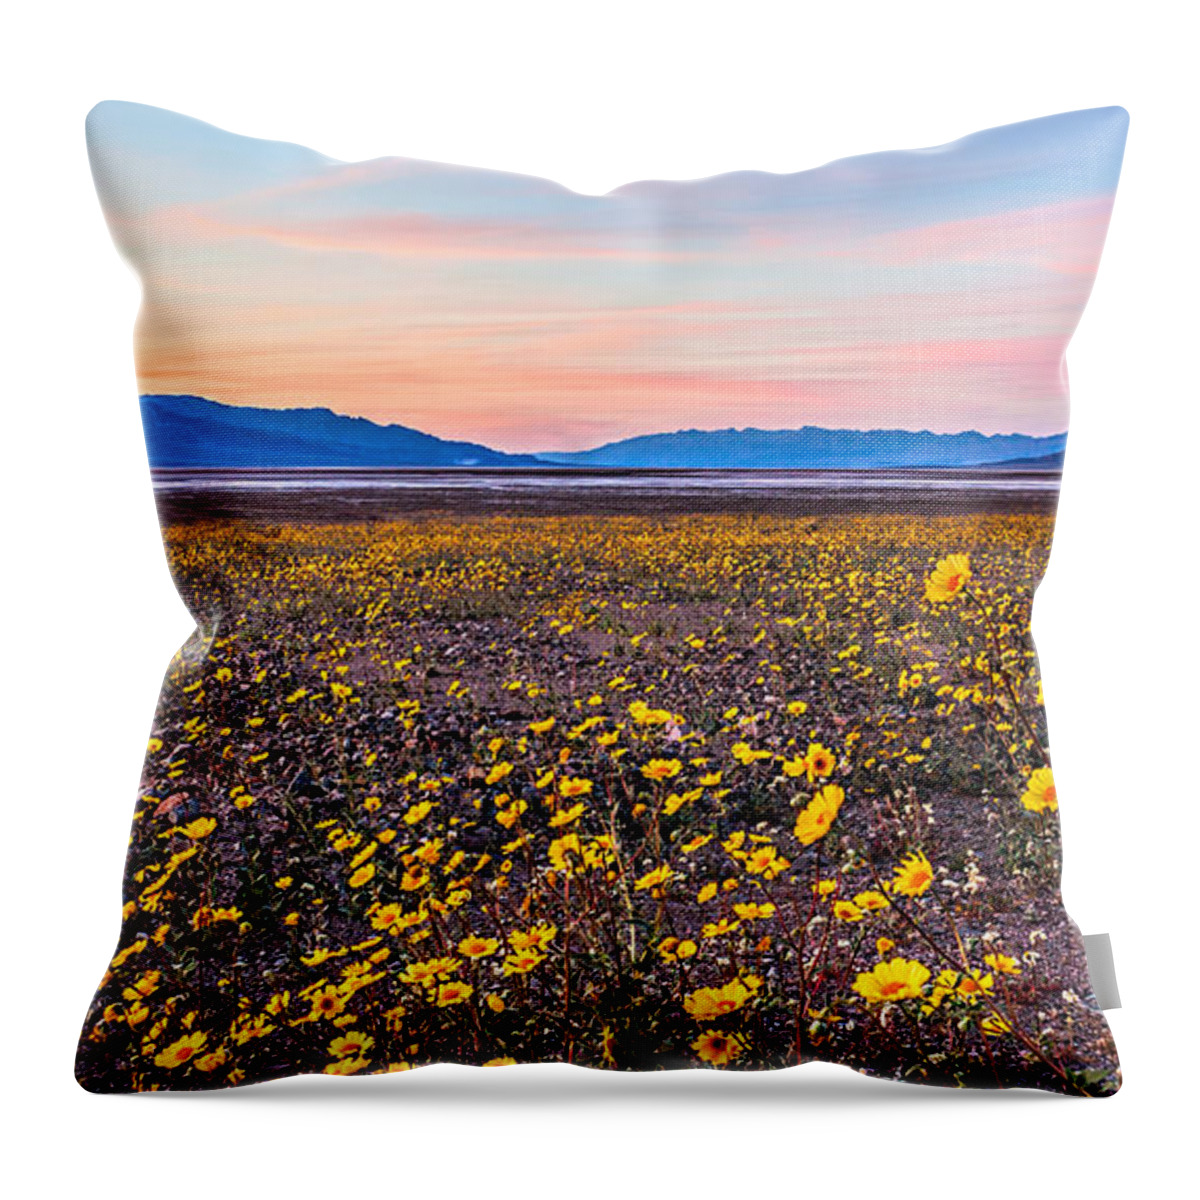 Death Valley Throw Pillow featuring the photograph Death Valley Sunset by Rick Wicker